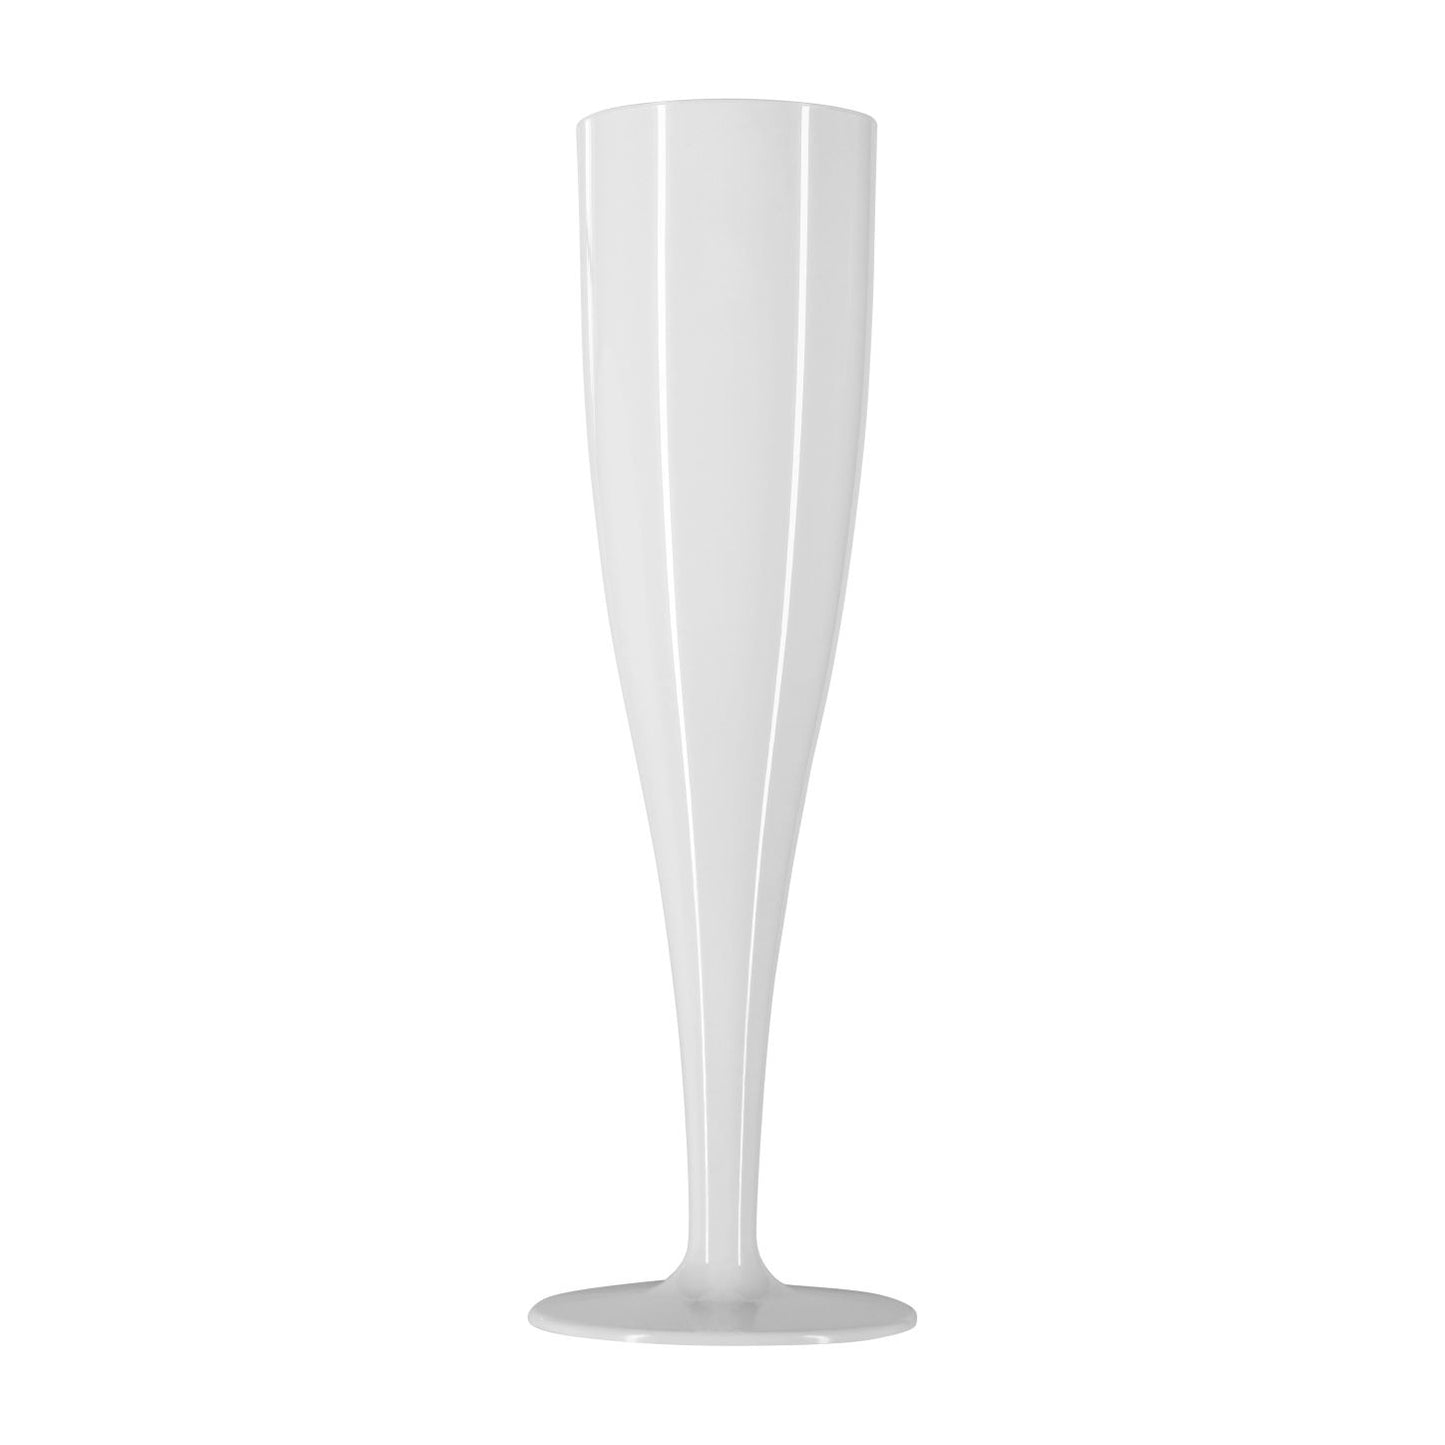 100 x White Biodegradable Prosecco Flutes - 135ml - One Piece Glossy Champagne Glass